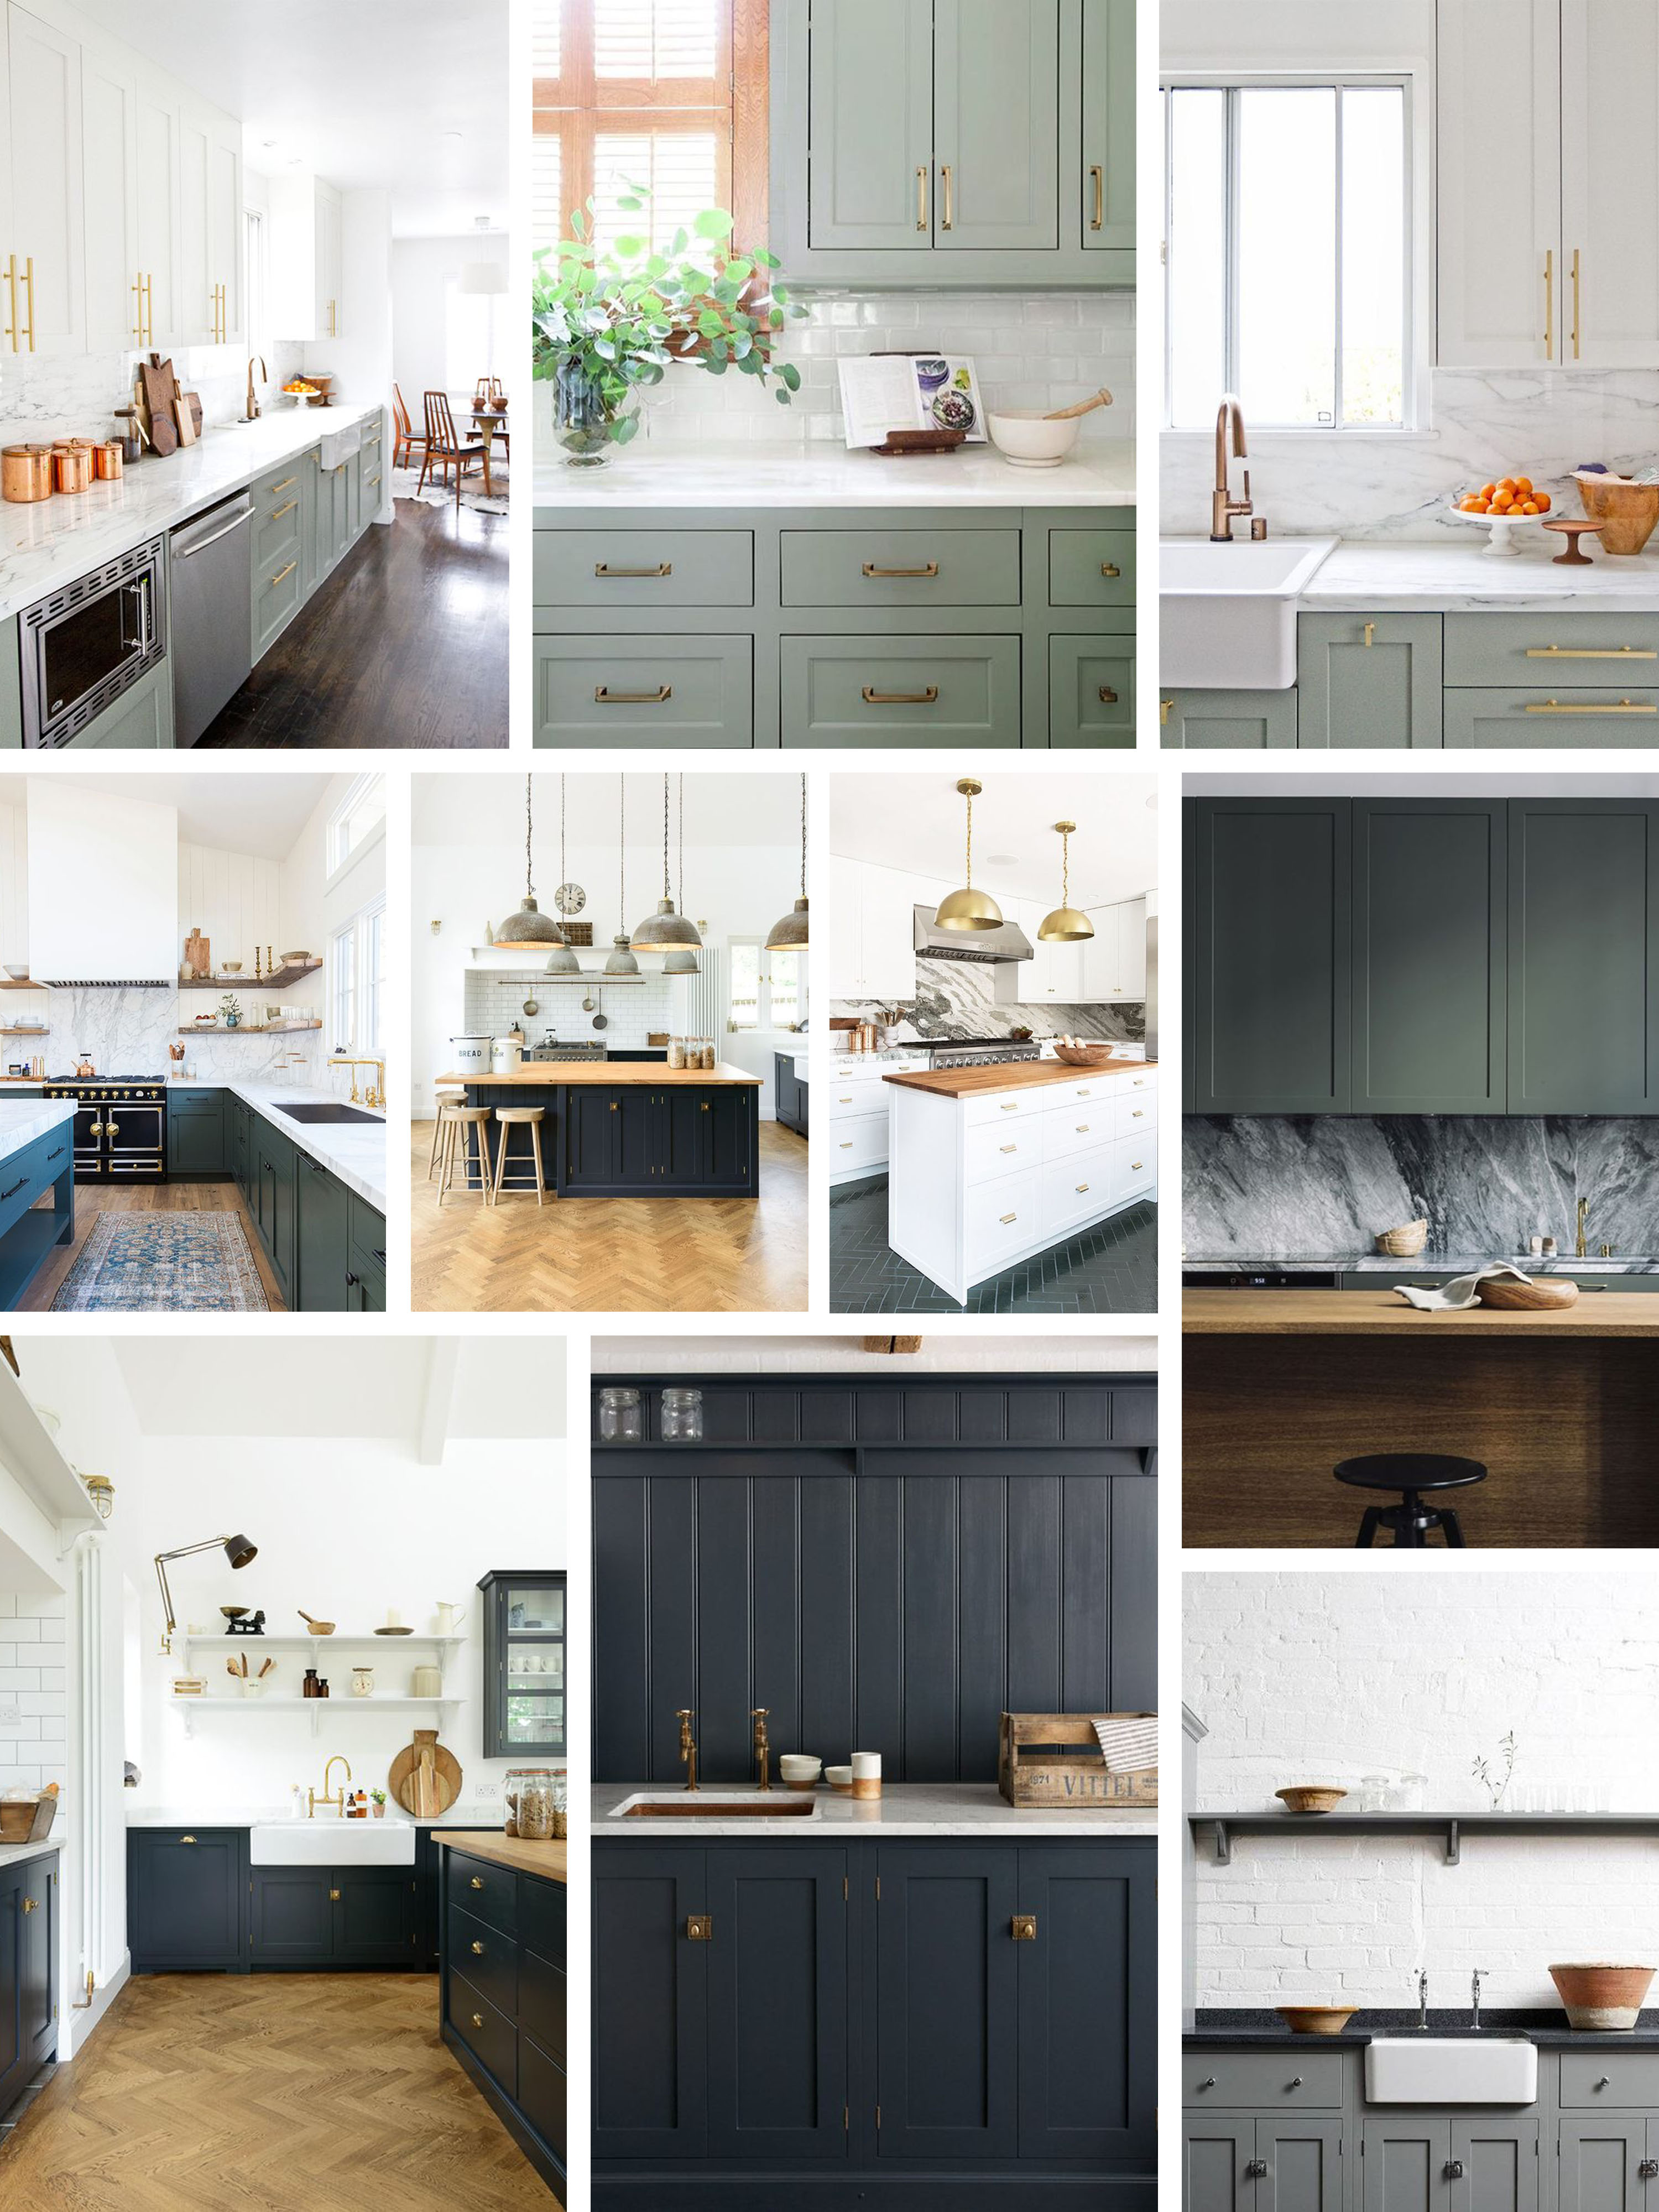 How to create a bespoke kitchen